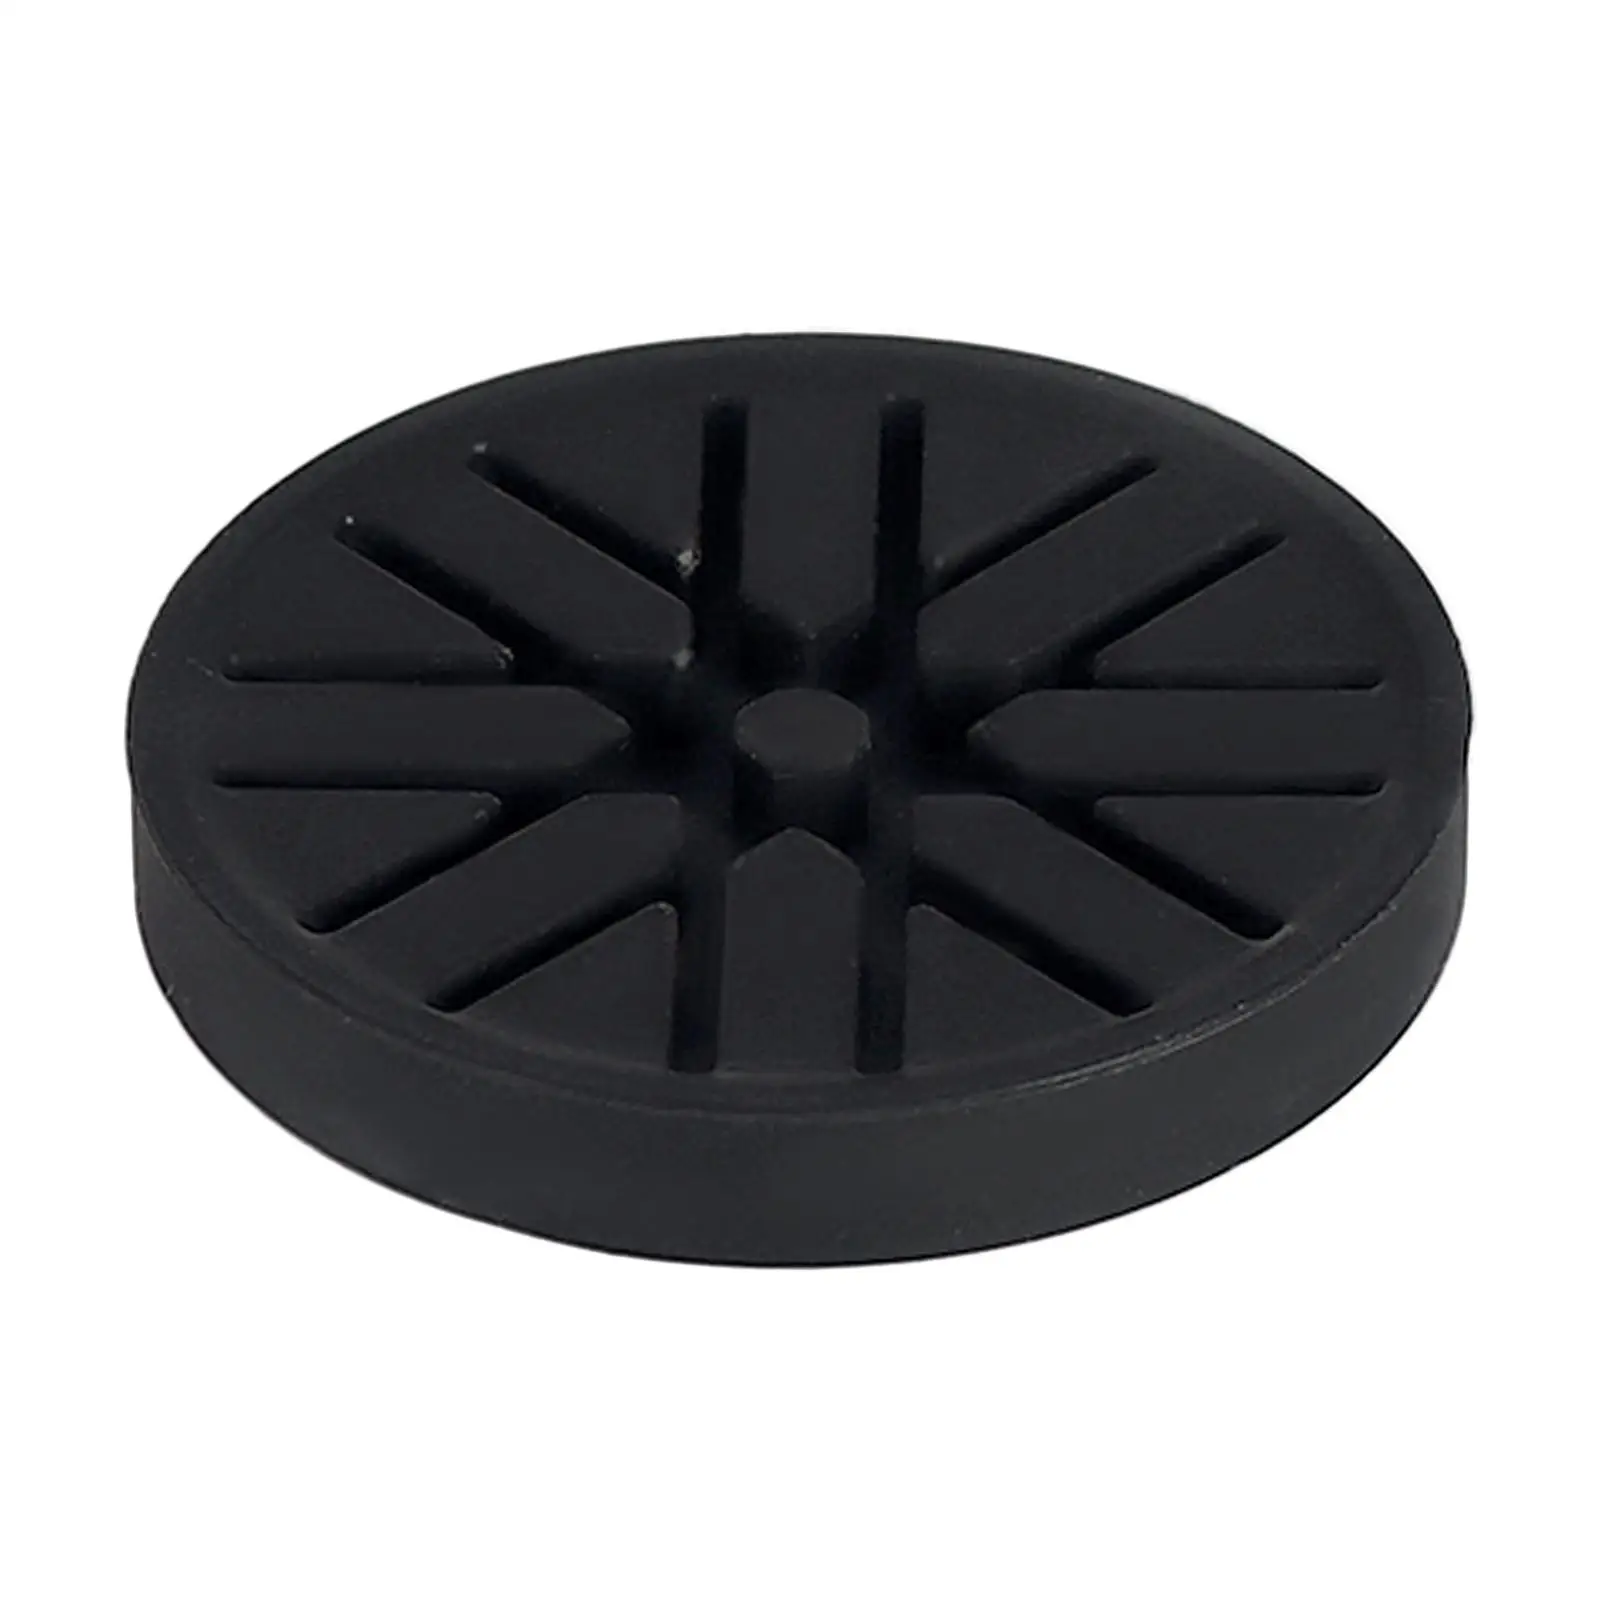 Silicone Puck Stand Holder for Reusable Basket Coffee Filters,Espresso Machine